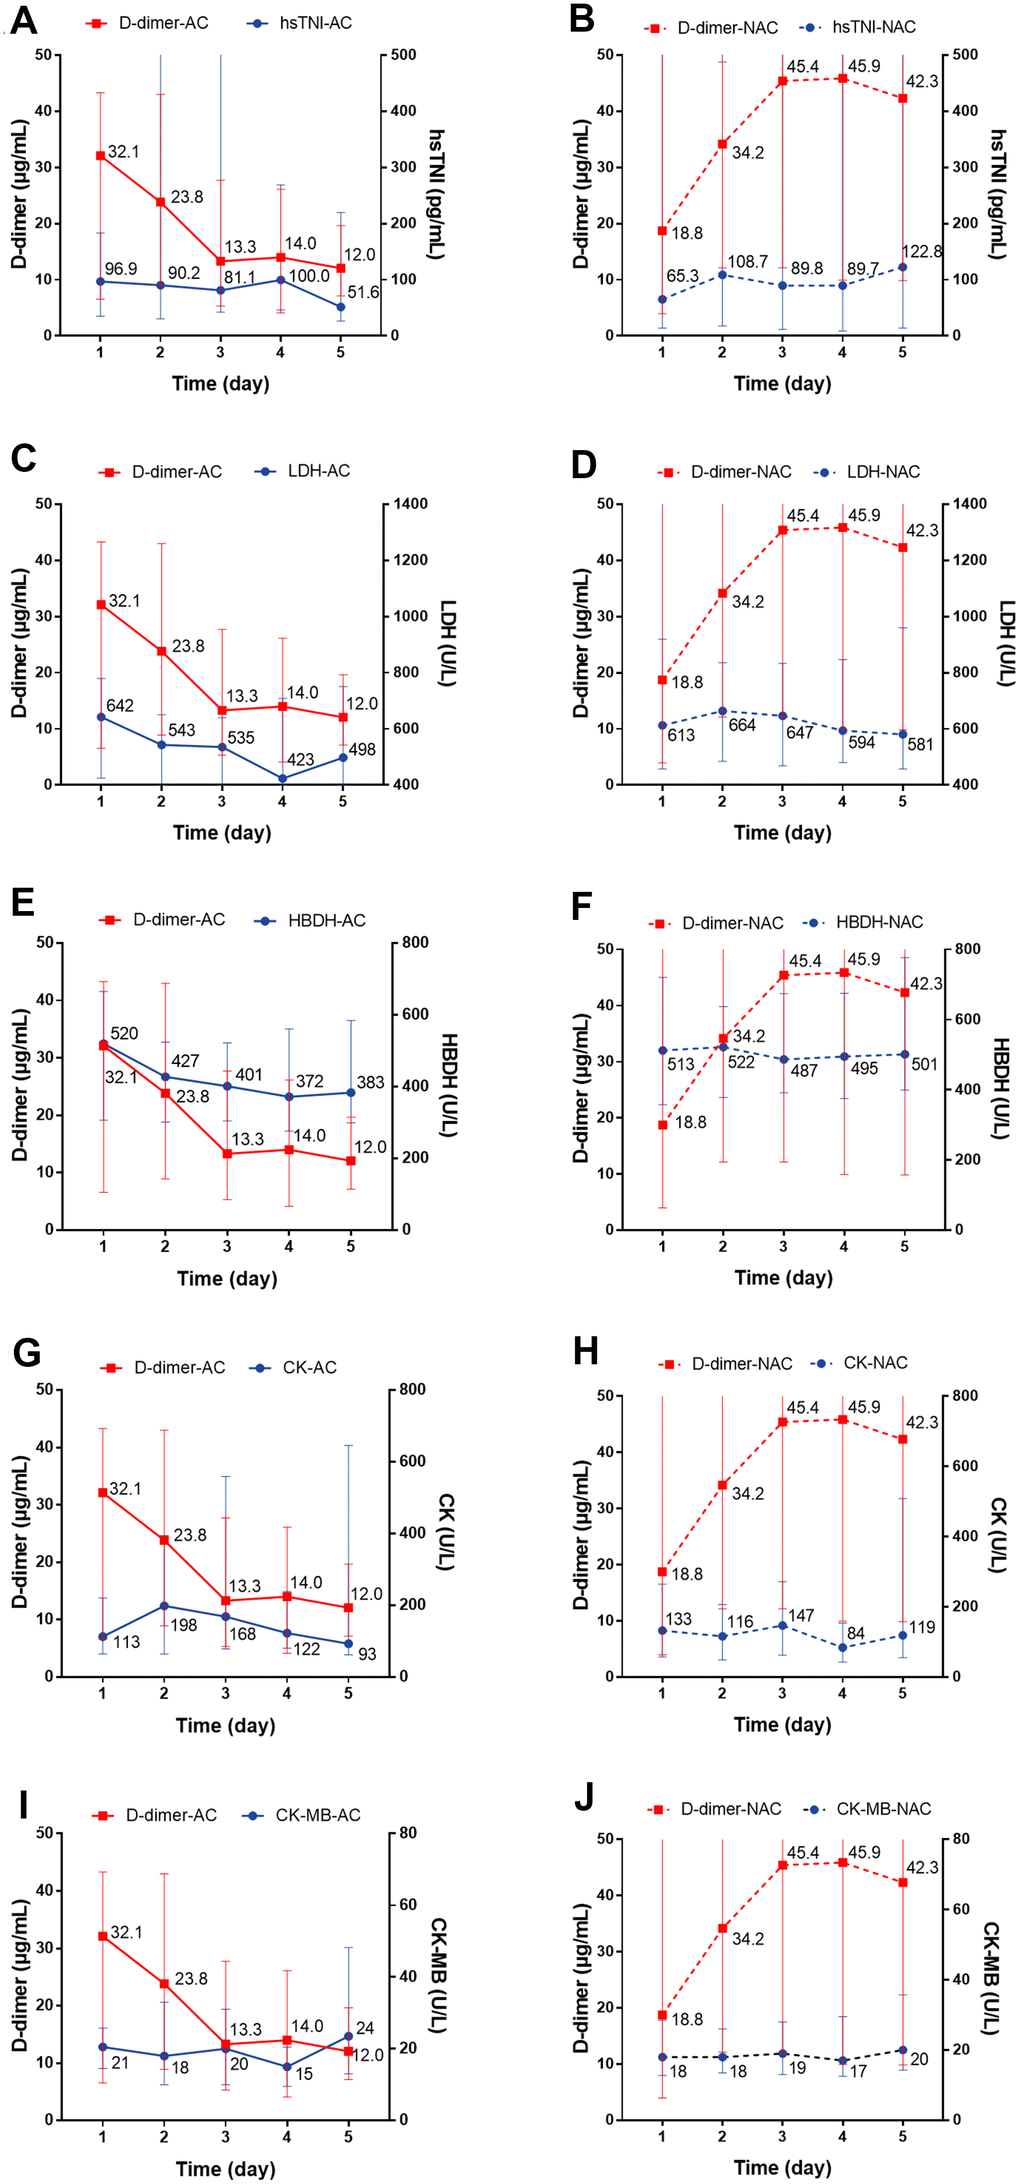 The dynamic changes over 5 consecutive days in myocardial markers in critical type COVID-19 patients with or without anticoagulation treatment. (A, B) hsTNI; (C, D) LDH; (E, F) HBDH; (G, H) CK; (I, J) CK-MB. All P values can be found in Supplementary Table 2. COVID-19: coronavirus disease 2019, NAC: non-anticoagulant; hsTNI: high-sensitivity troponin, LDH: lactic dehydrogenase, HBDH: hydroxybutyrate dehydrogenase, CK: creatine kinase, CK-MB: creatine kinase-MB.